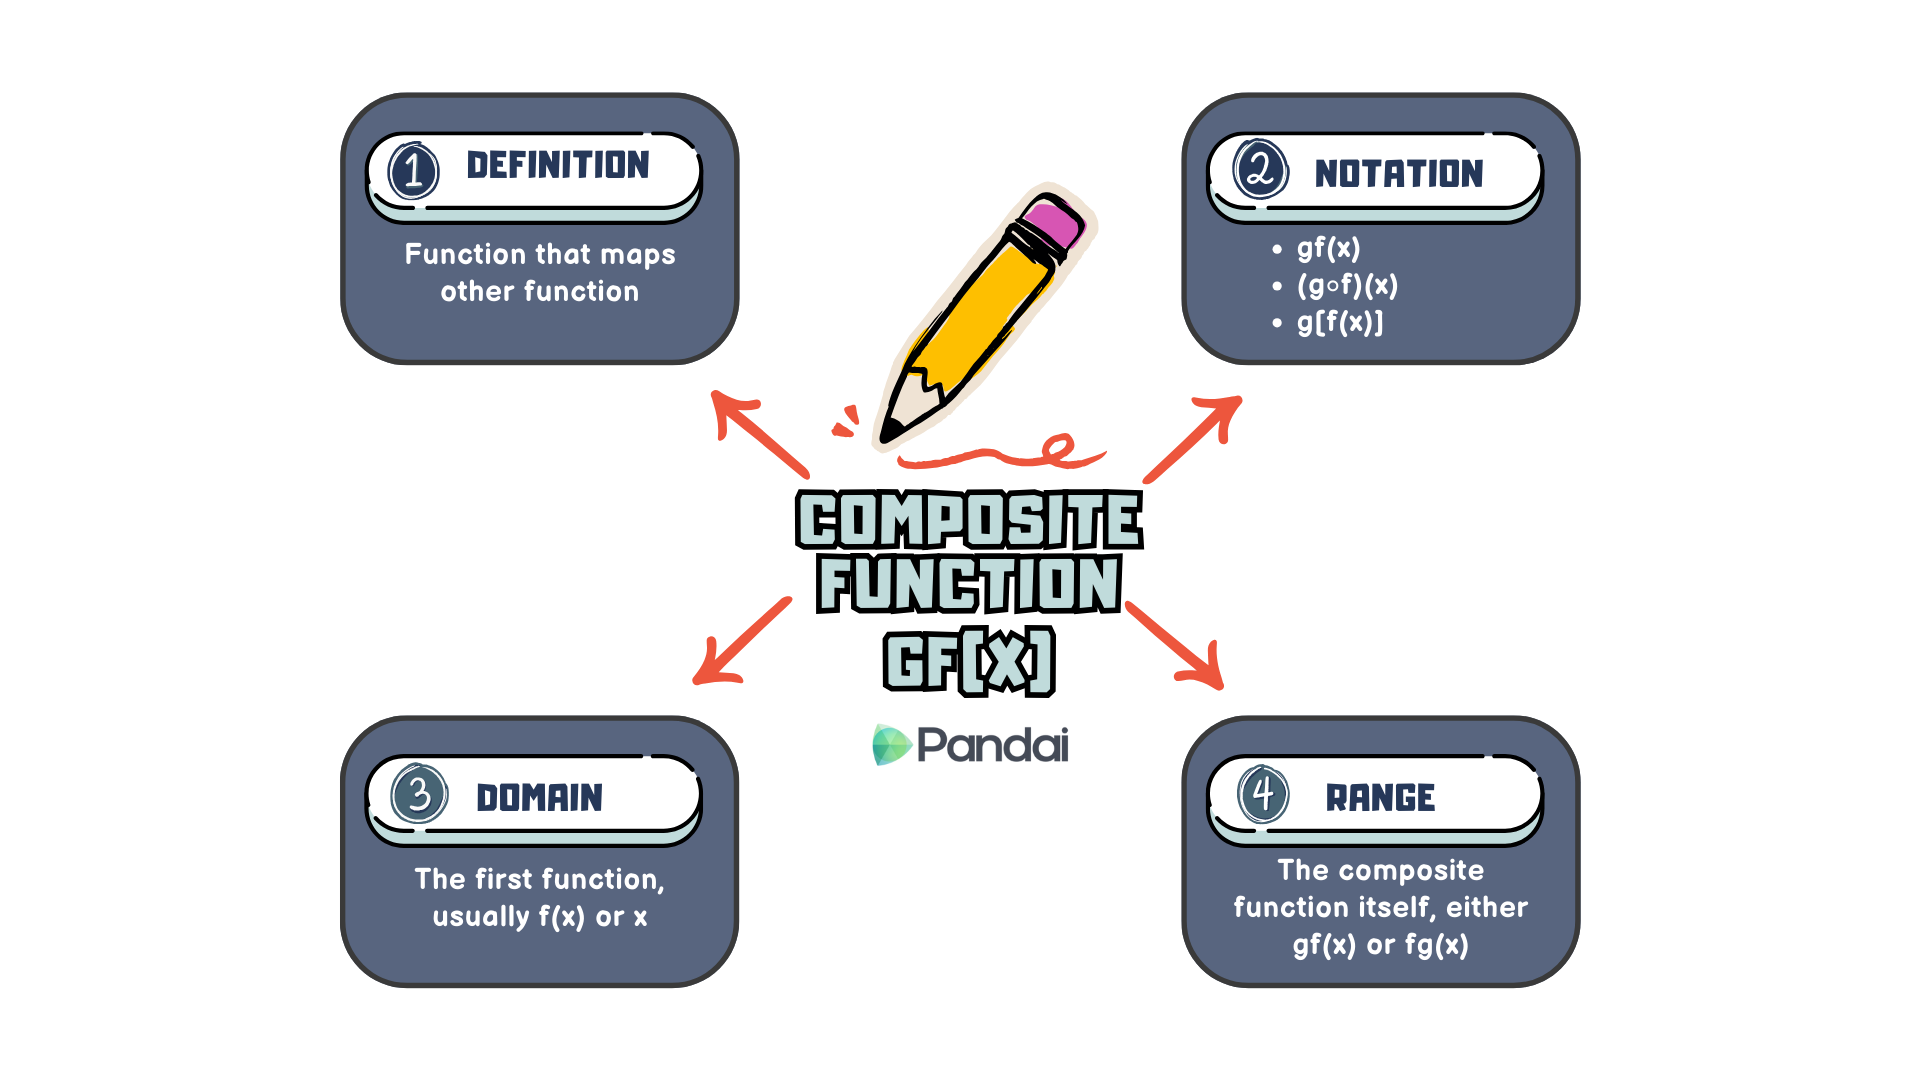 This image is an educational diagram explaining composite functions, denoted as gf(x). It is divided into four sections: 1. ‘Definition’: A function that maps other functions. 2. ‘Notation’: Includes g(f(x)), f(g(x)), and g∘f(x). 3. ‘Domain’: The first function, usually f(x) or x. 4. ‘Range’: The composite function itself, either gf(x) or fg(x). A pencil illustration is in the center, pointing to the term ‘Composite Function gf(x)’ with arrows connecting to each section.